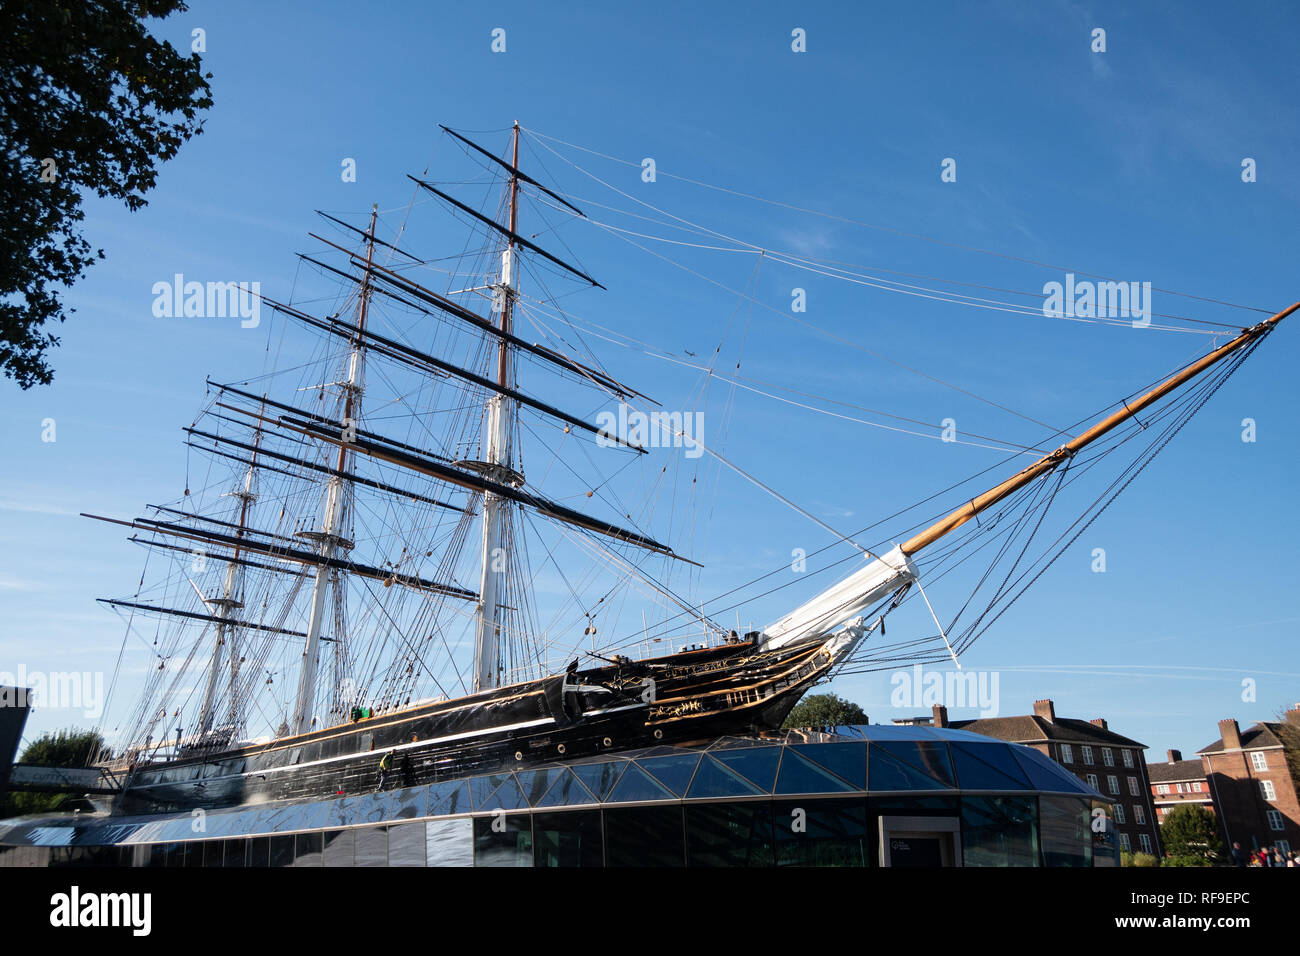 Greenwich Uk The Cutty Sark Is A Restored Historic British Clipper Sailing Ship That Is Now